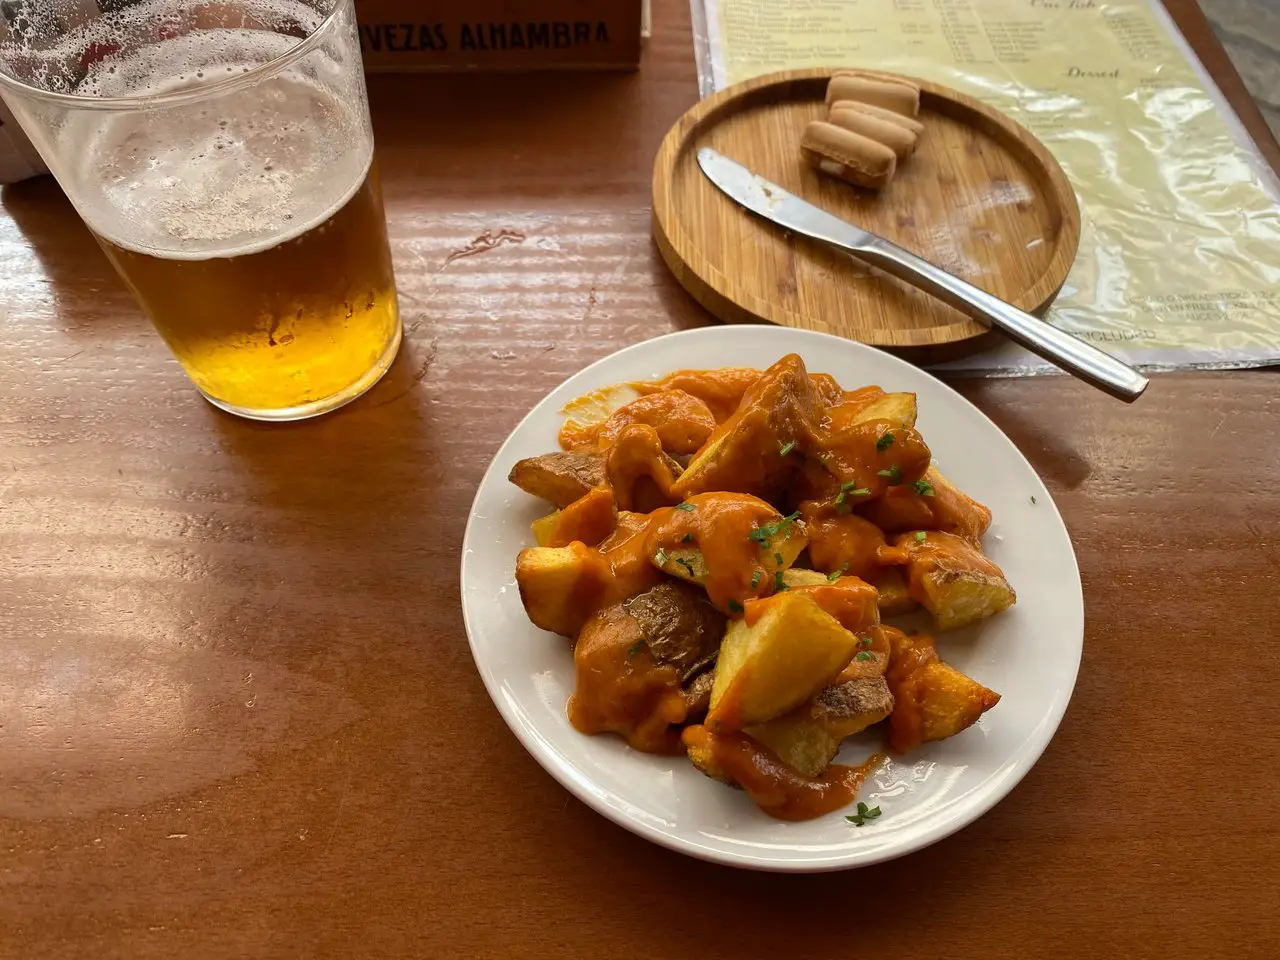 Plate of patatas bravas with a glass of beer next to it